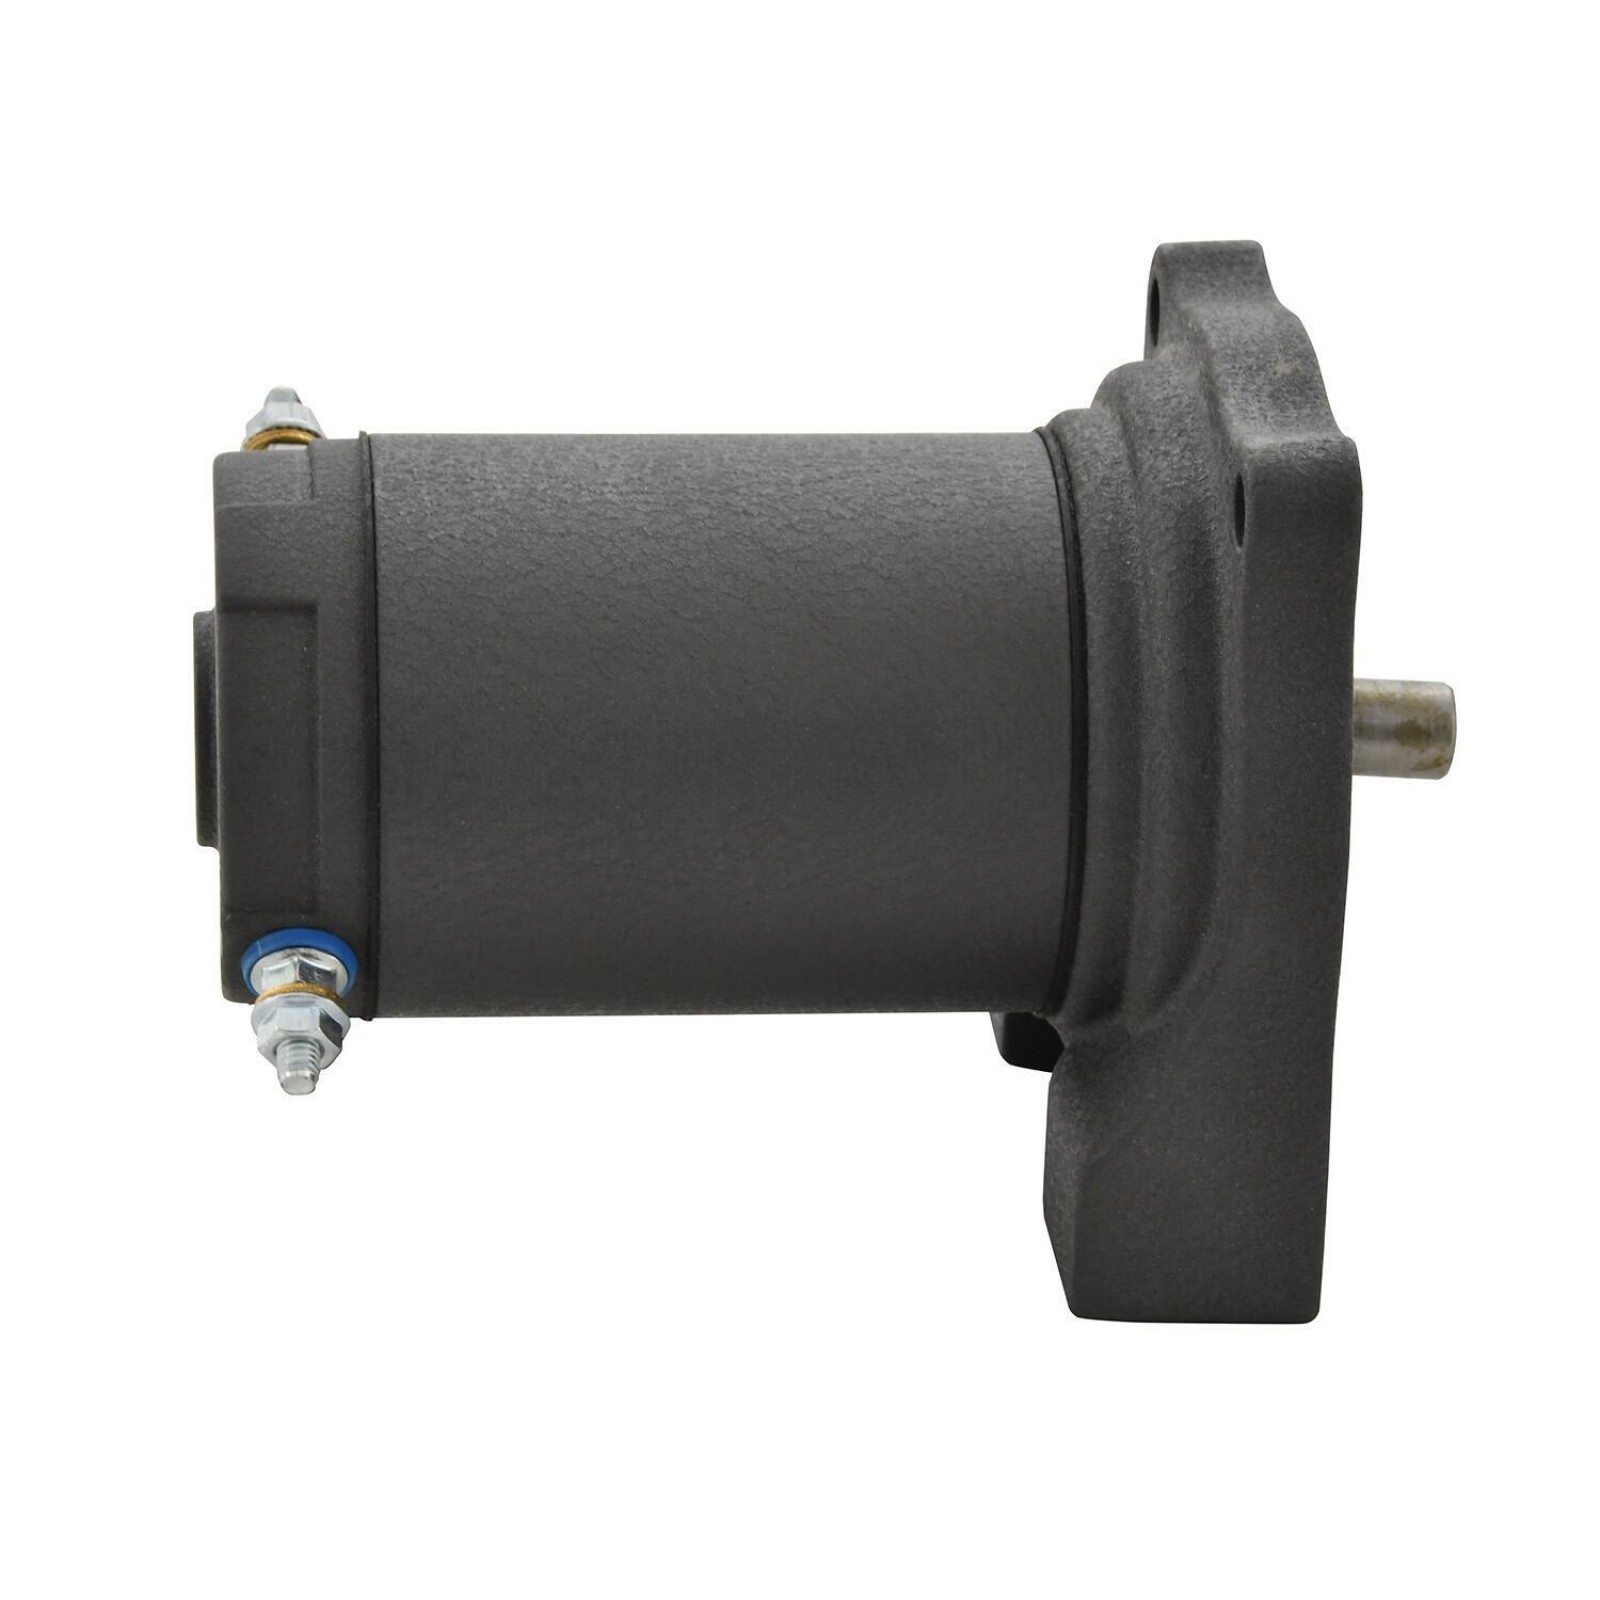 Replacement Motor for Terra 25 Winch